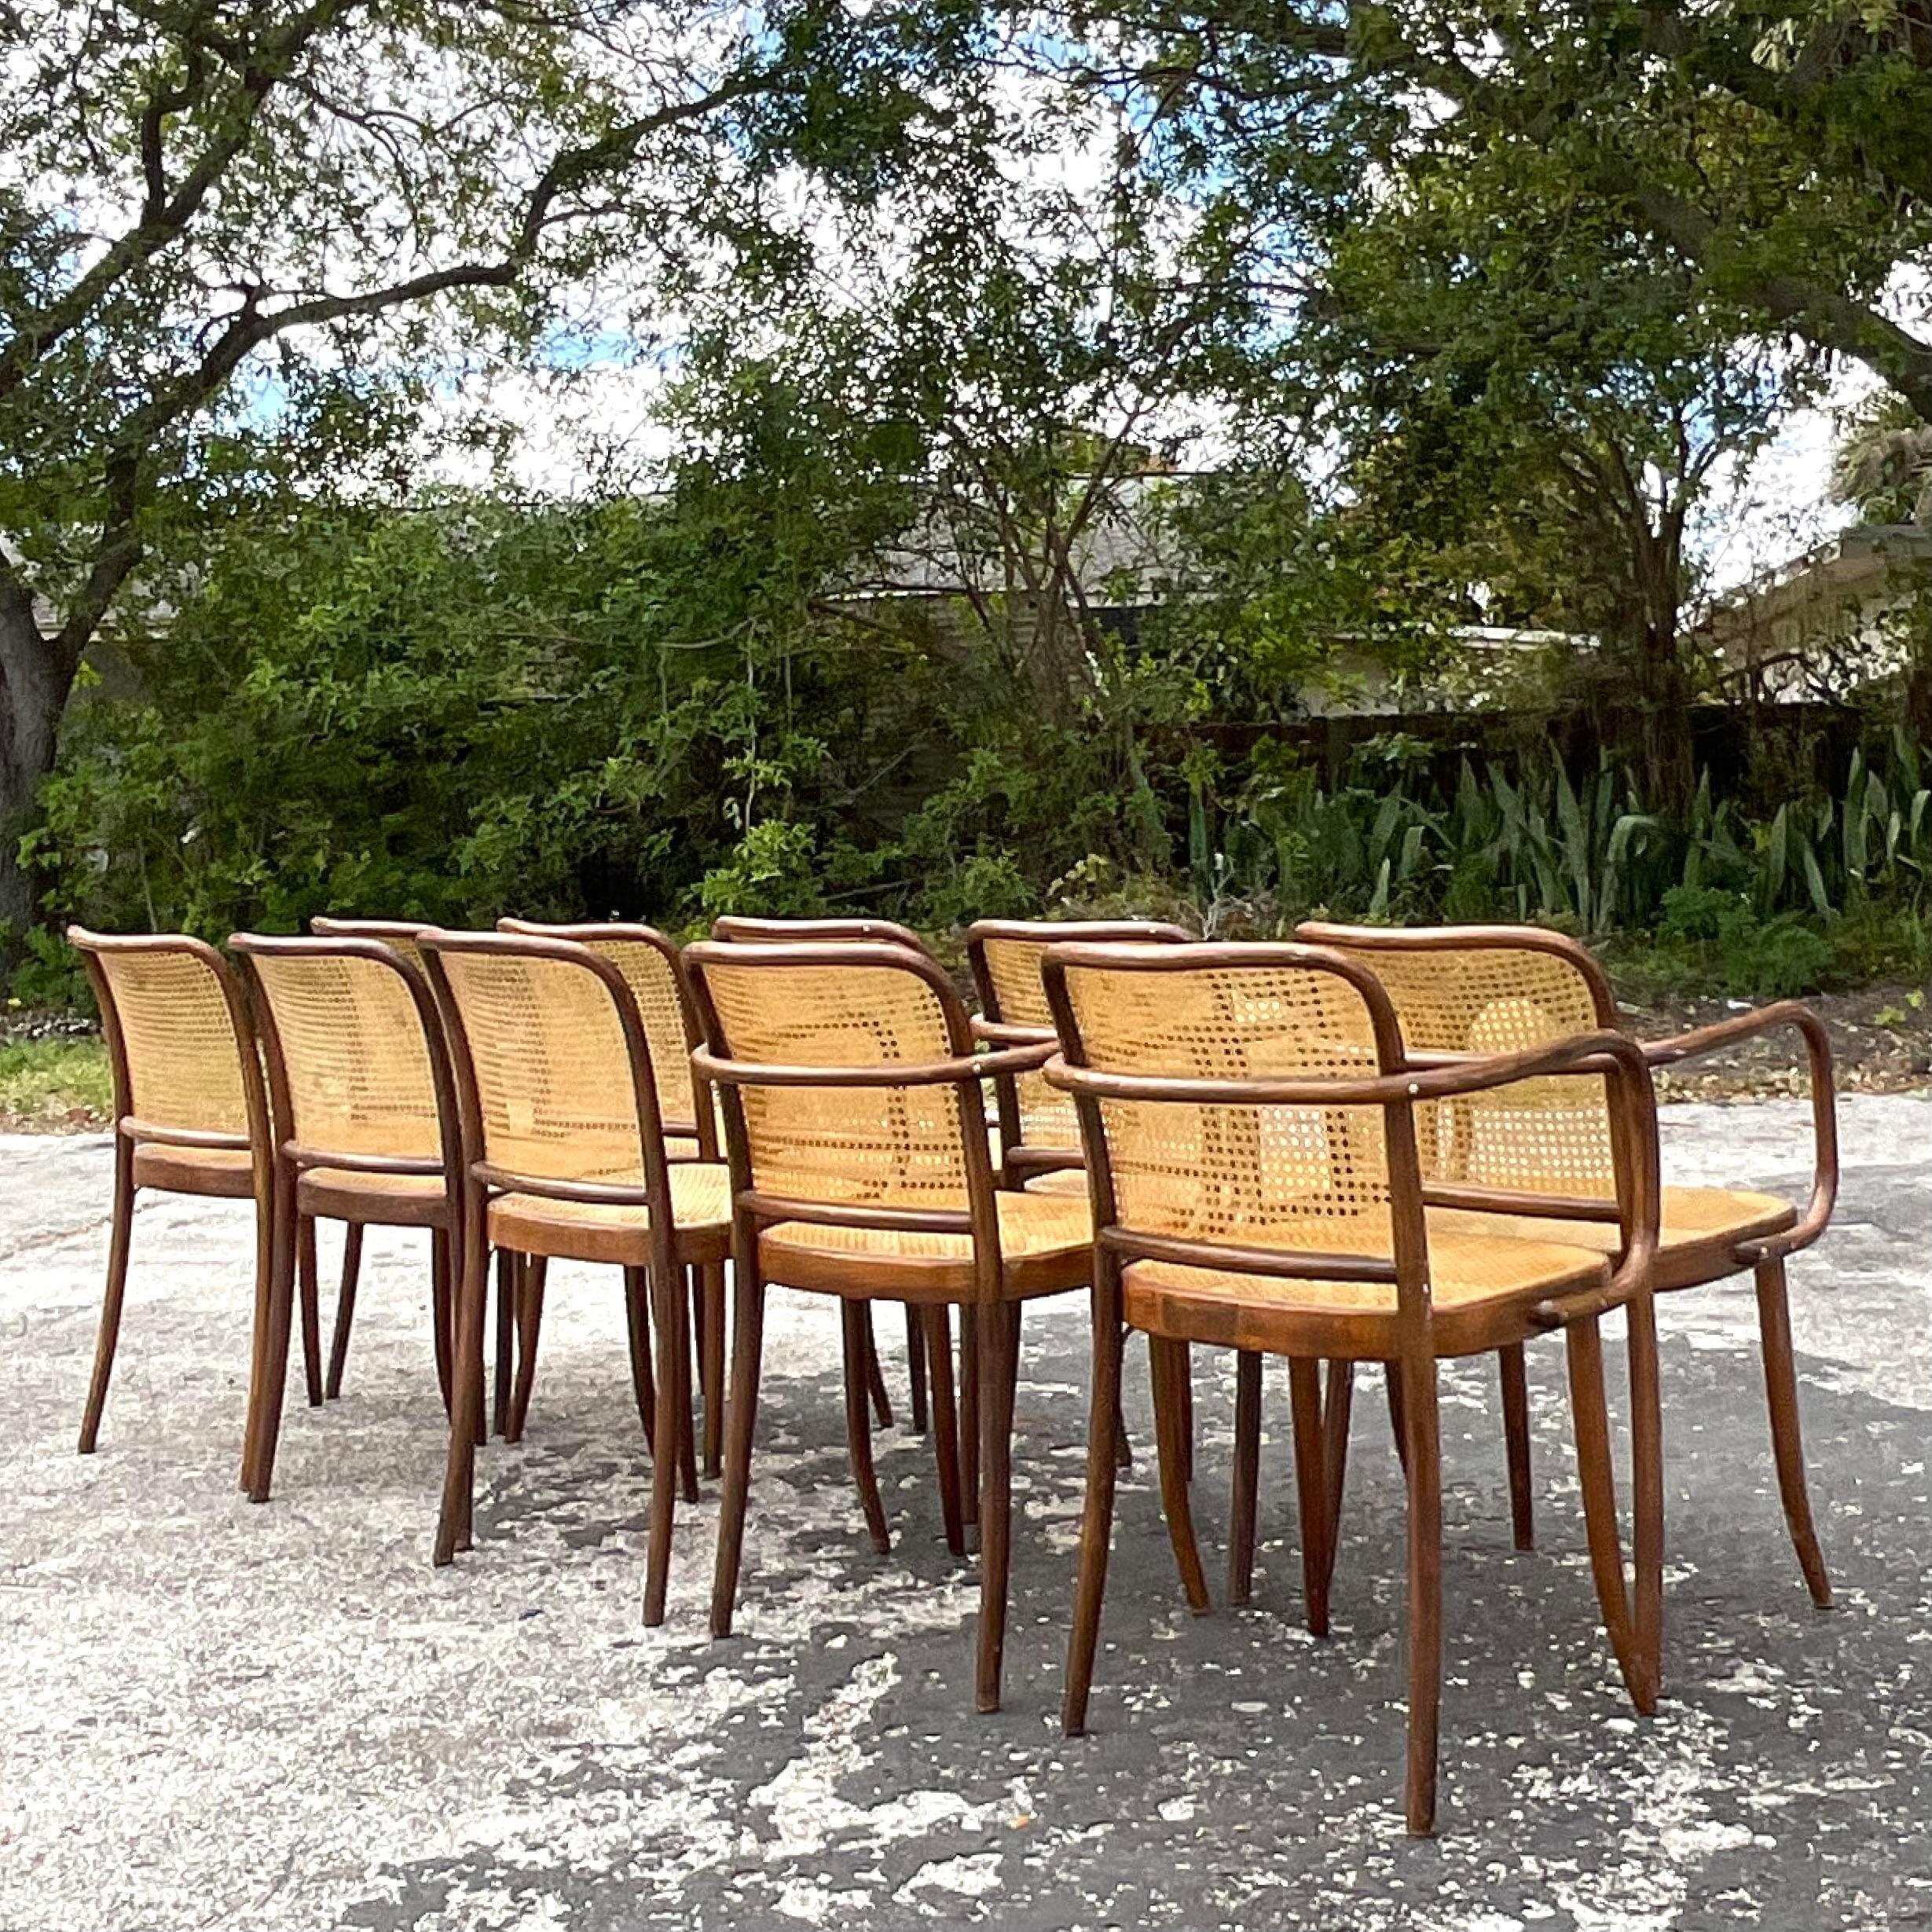 Mid-20th Century Vintage Boho Josef Hoffmann for Stendig Cane Dining Chairs - Set of 10